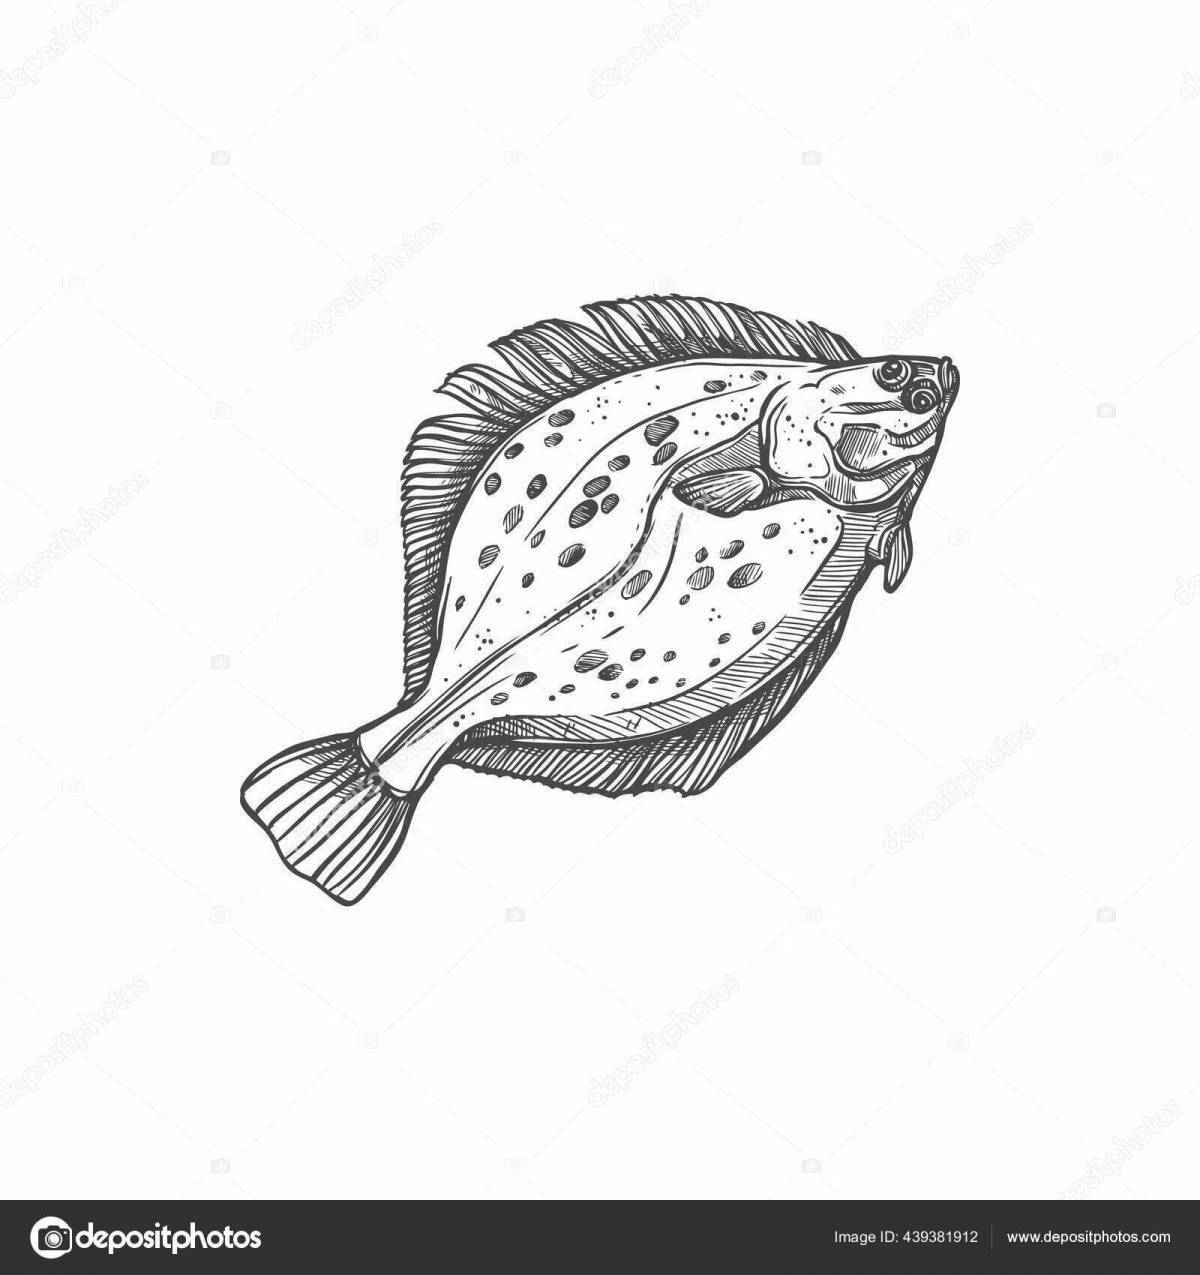 Charming flounder coloring